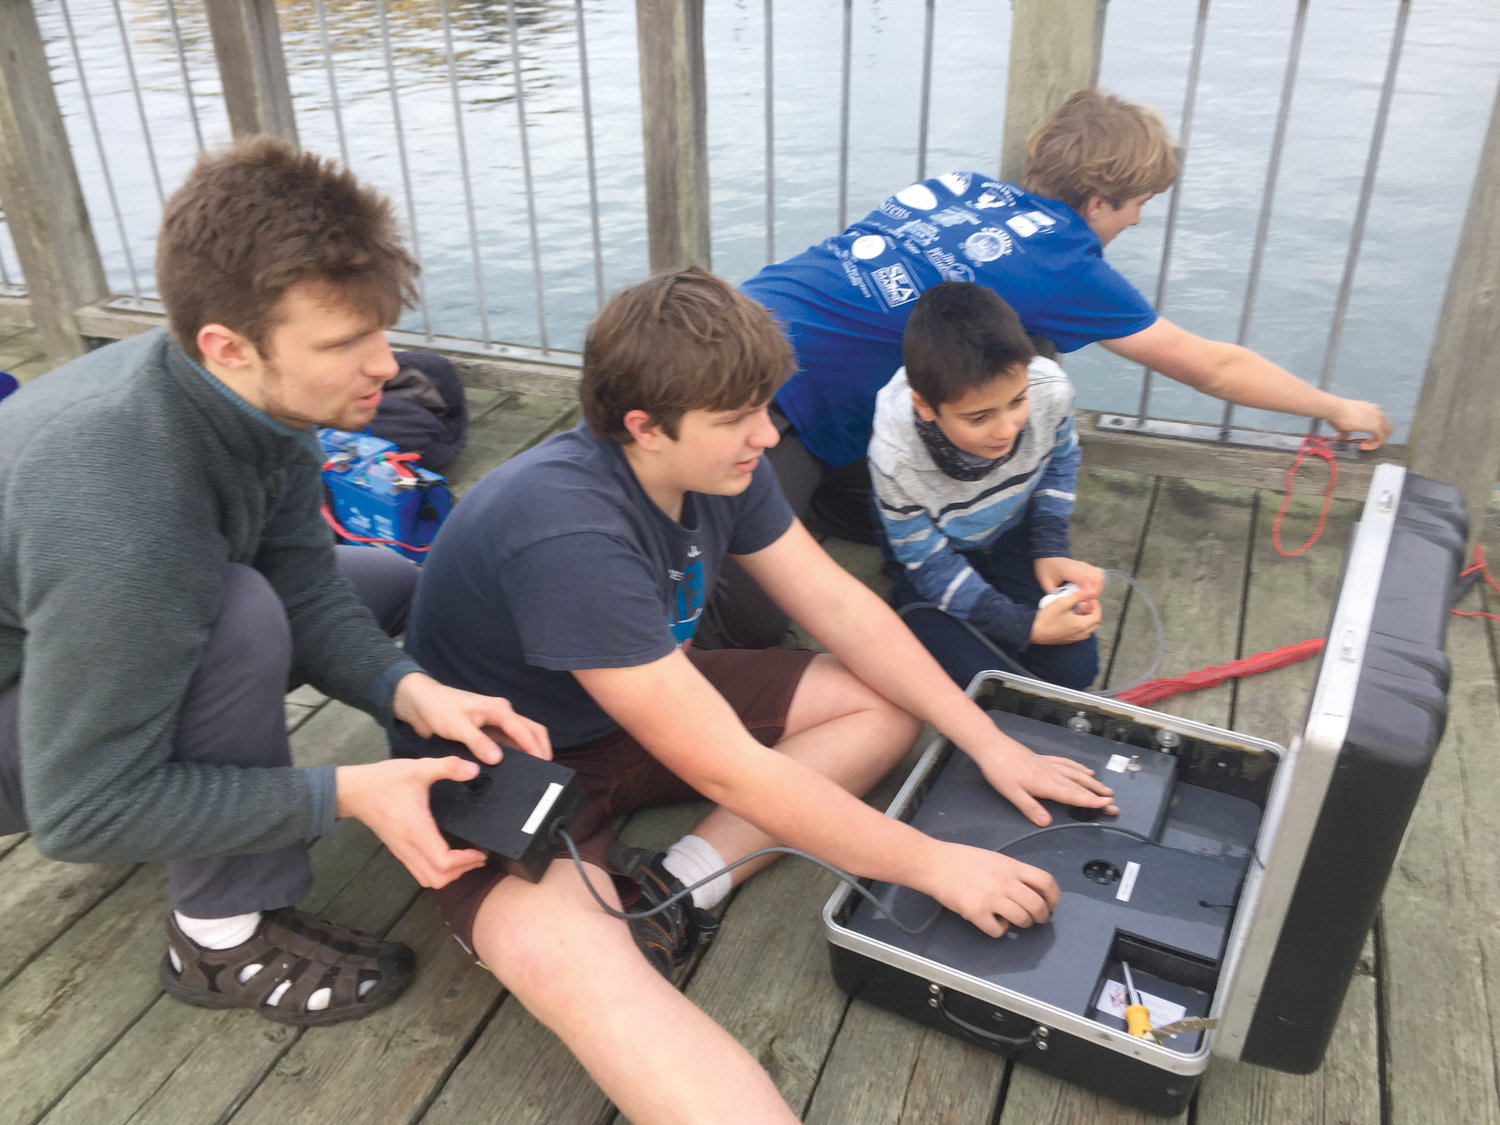 The team placed fourth at the national underwater ROV competition, partly due to their ability to work seamlessly together. Senior Logan Flanagan, ninth-grader Nathaniel Ashford, sixth-grader Ayden Ratliff and seventh-grader Everest Ashford all work in tandem during a saltwater test of their ROV in Port Townsend Bay.